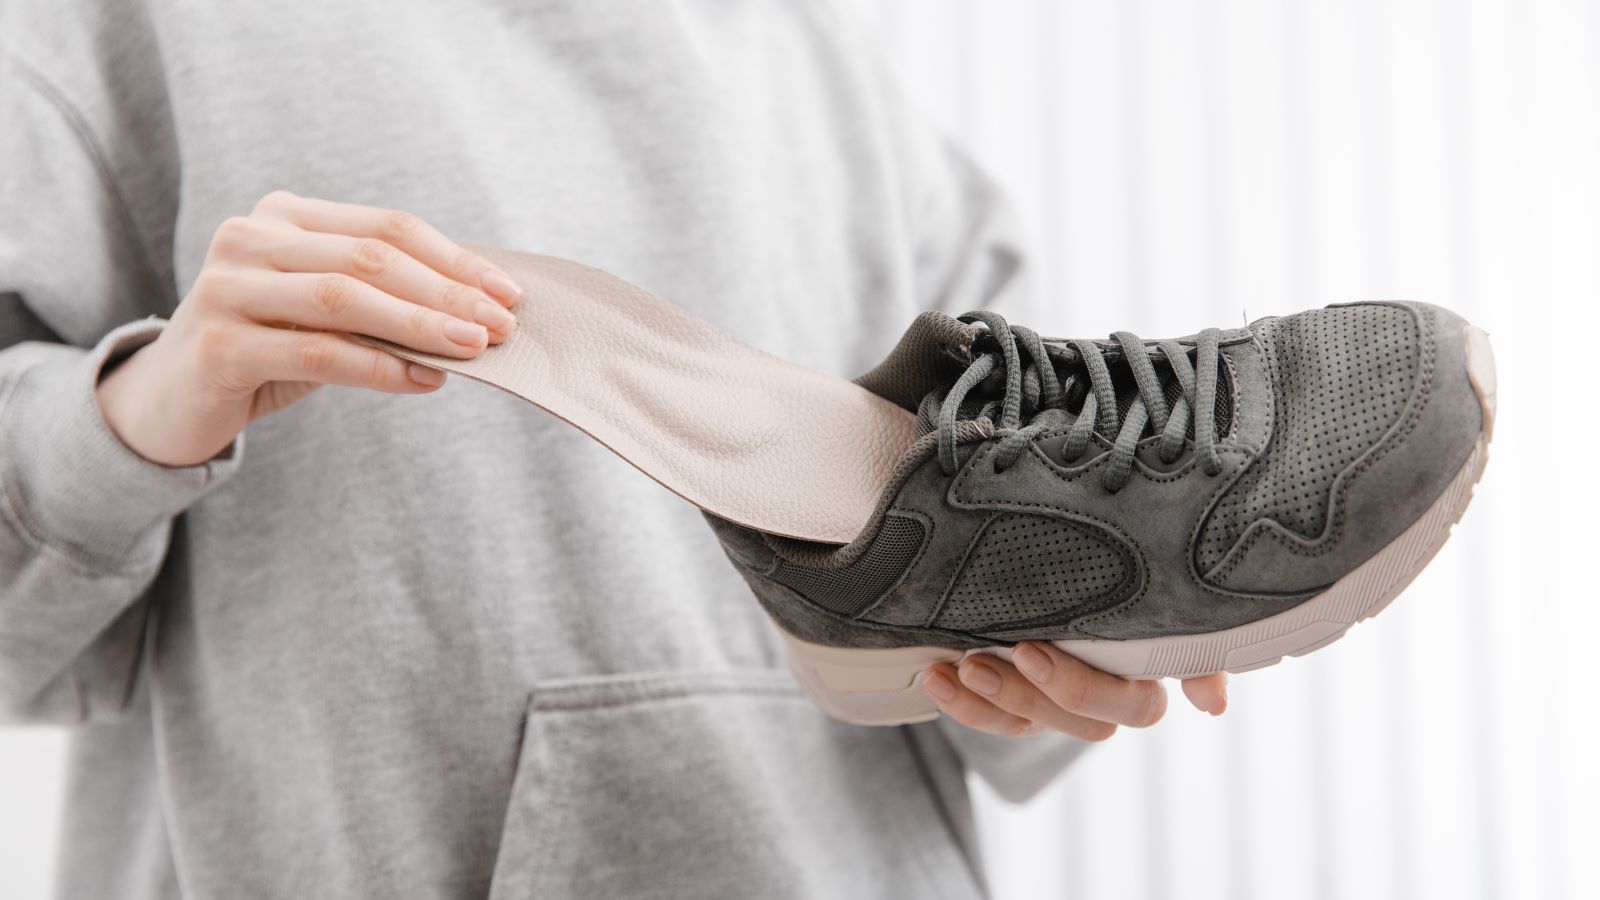 How do you know if you could benefit from shoe inserts? Here are four signs to look for, according to an expert.